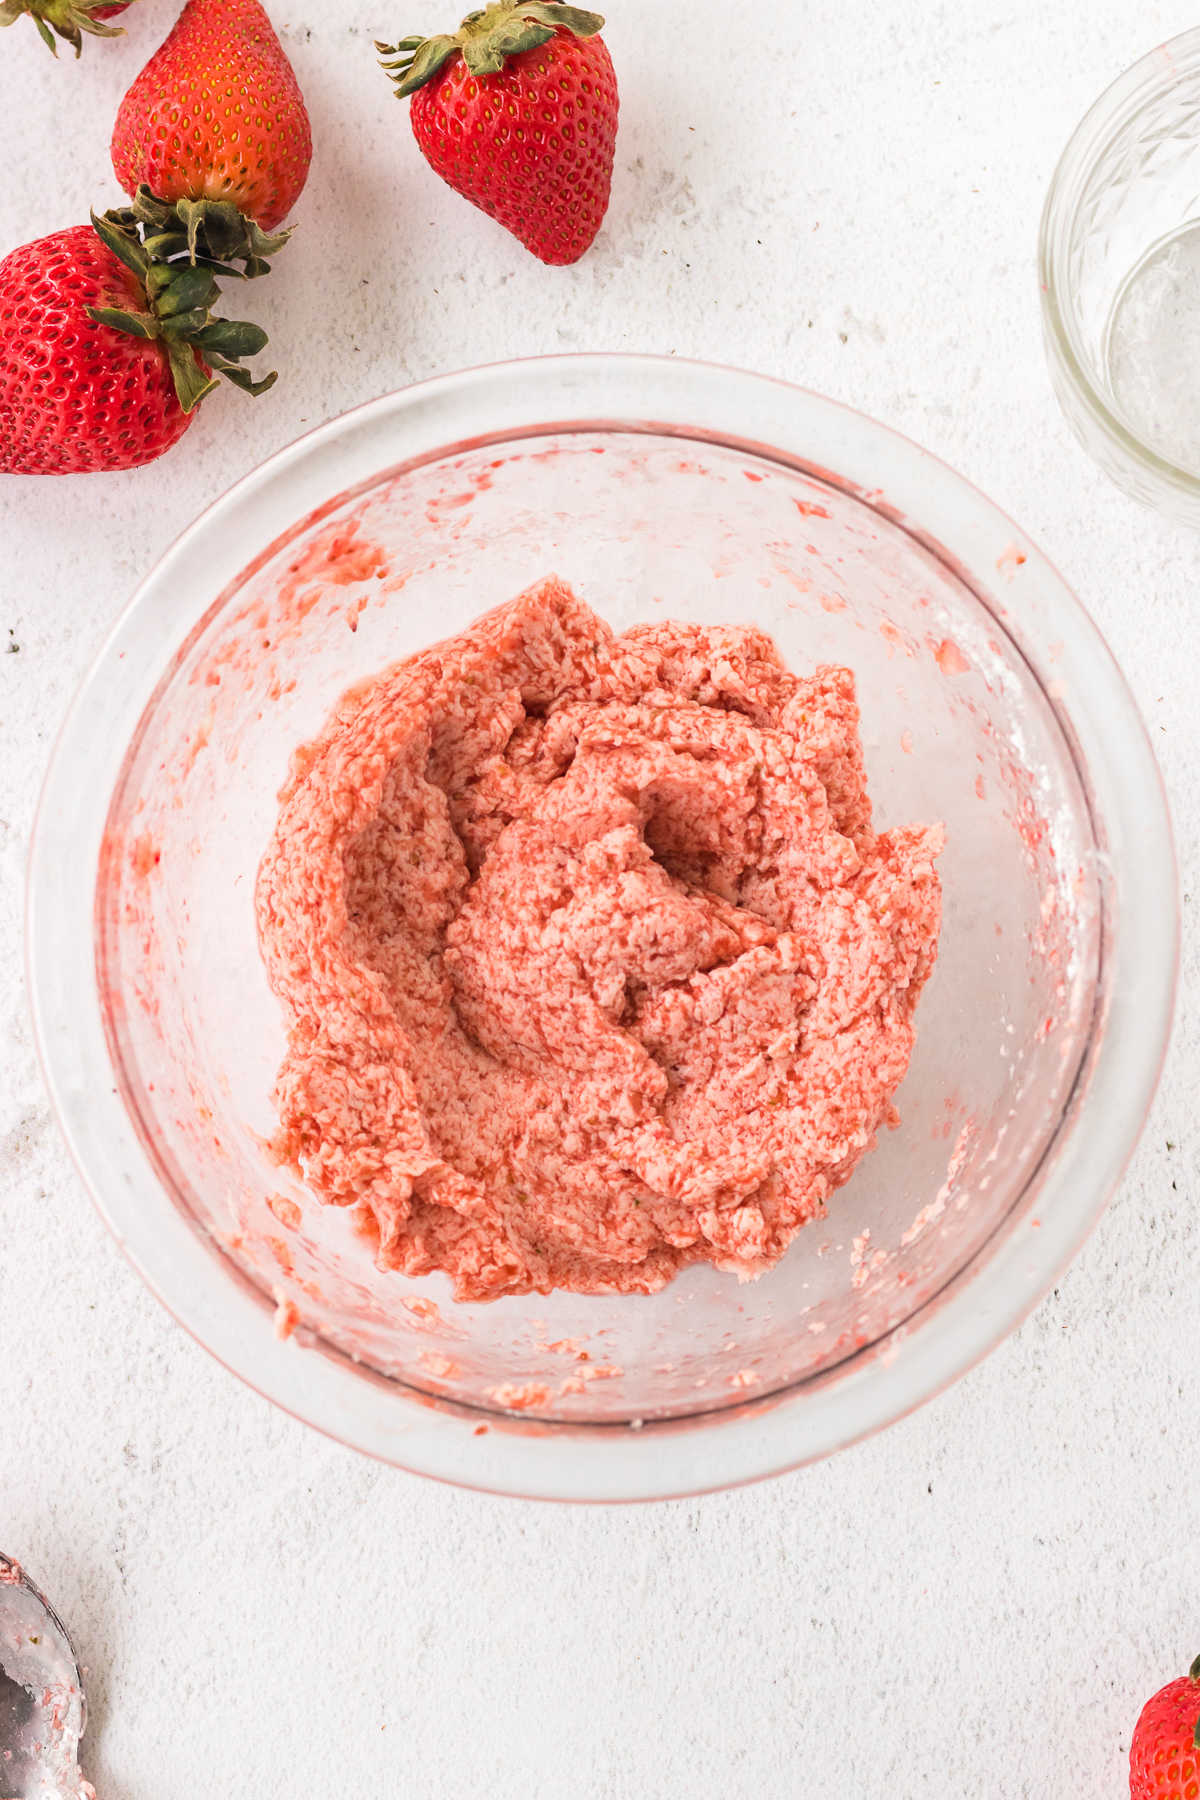 Overhead view of strawberry butter in a glass bowl.